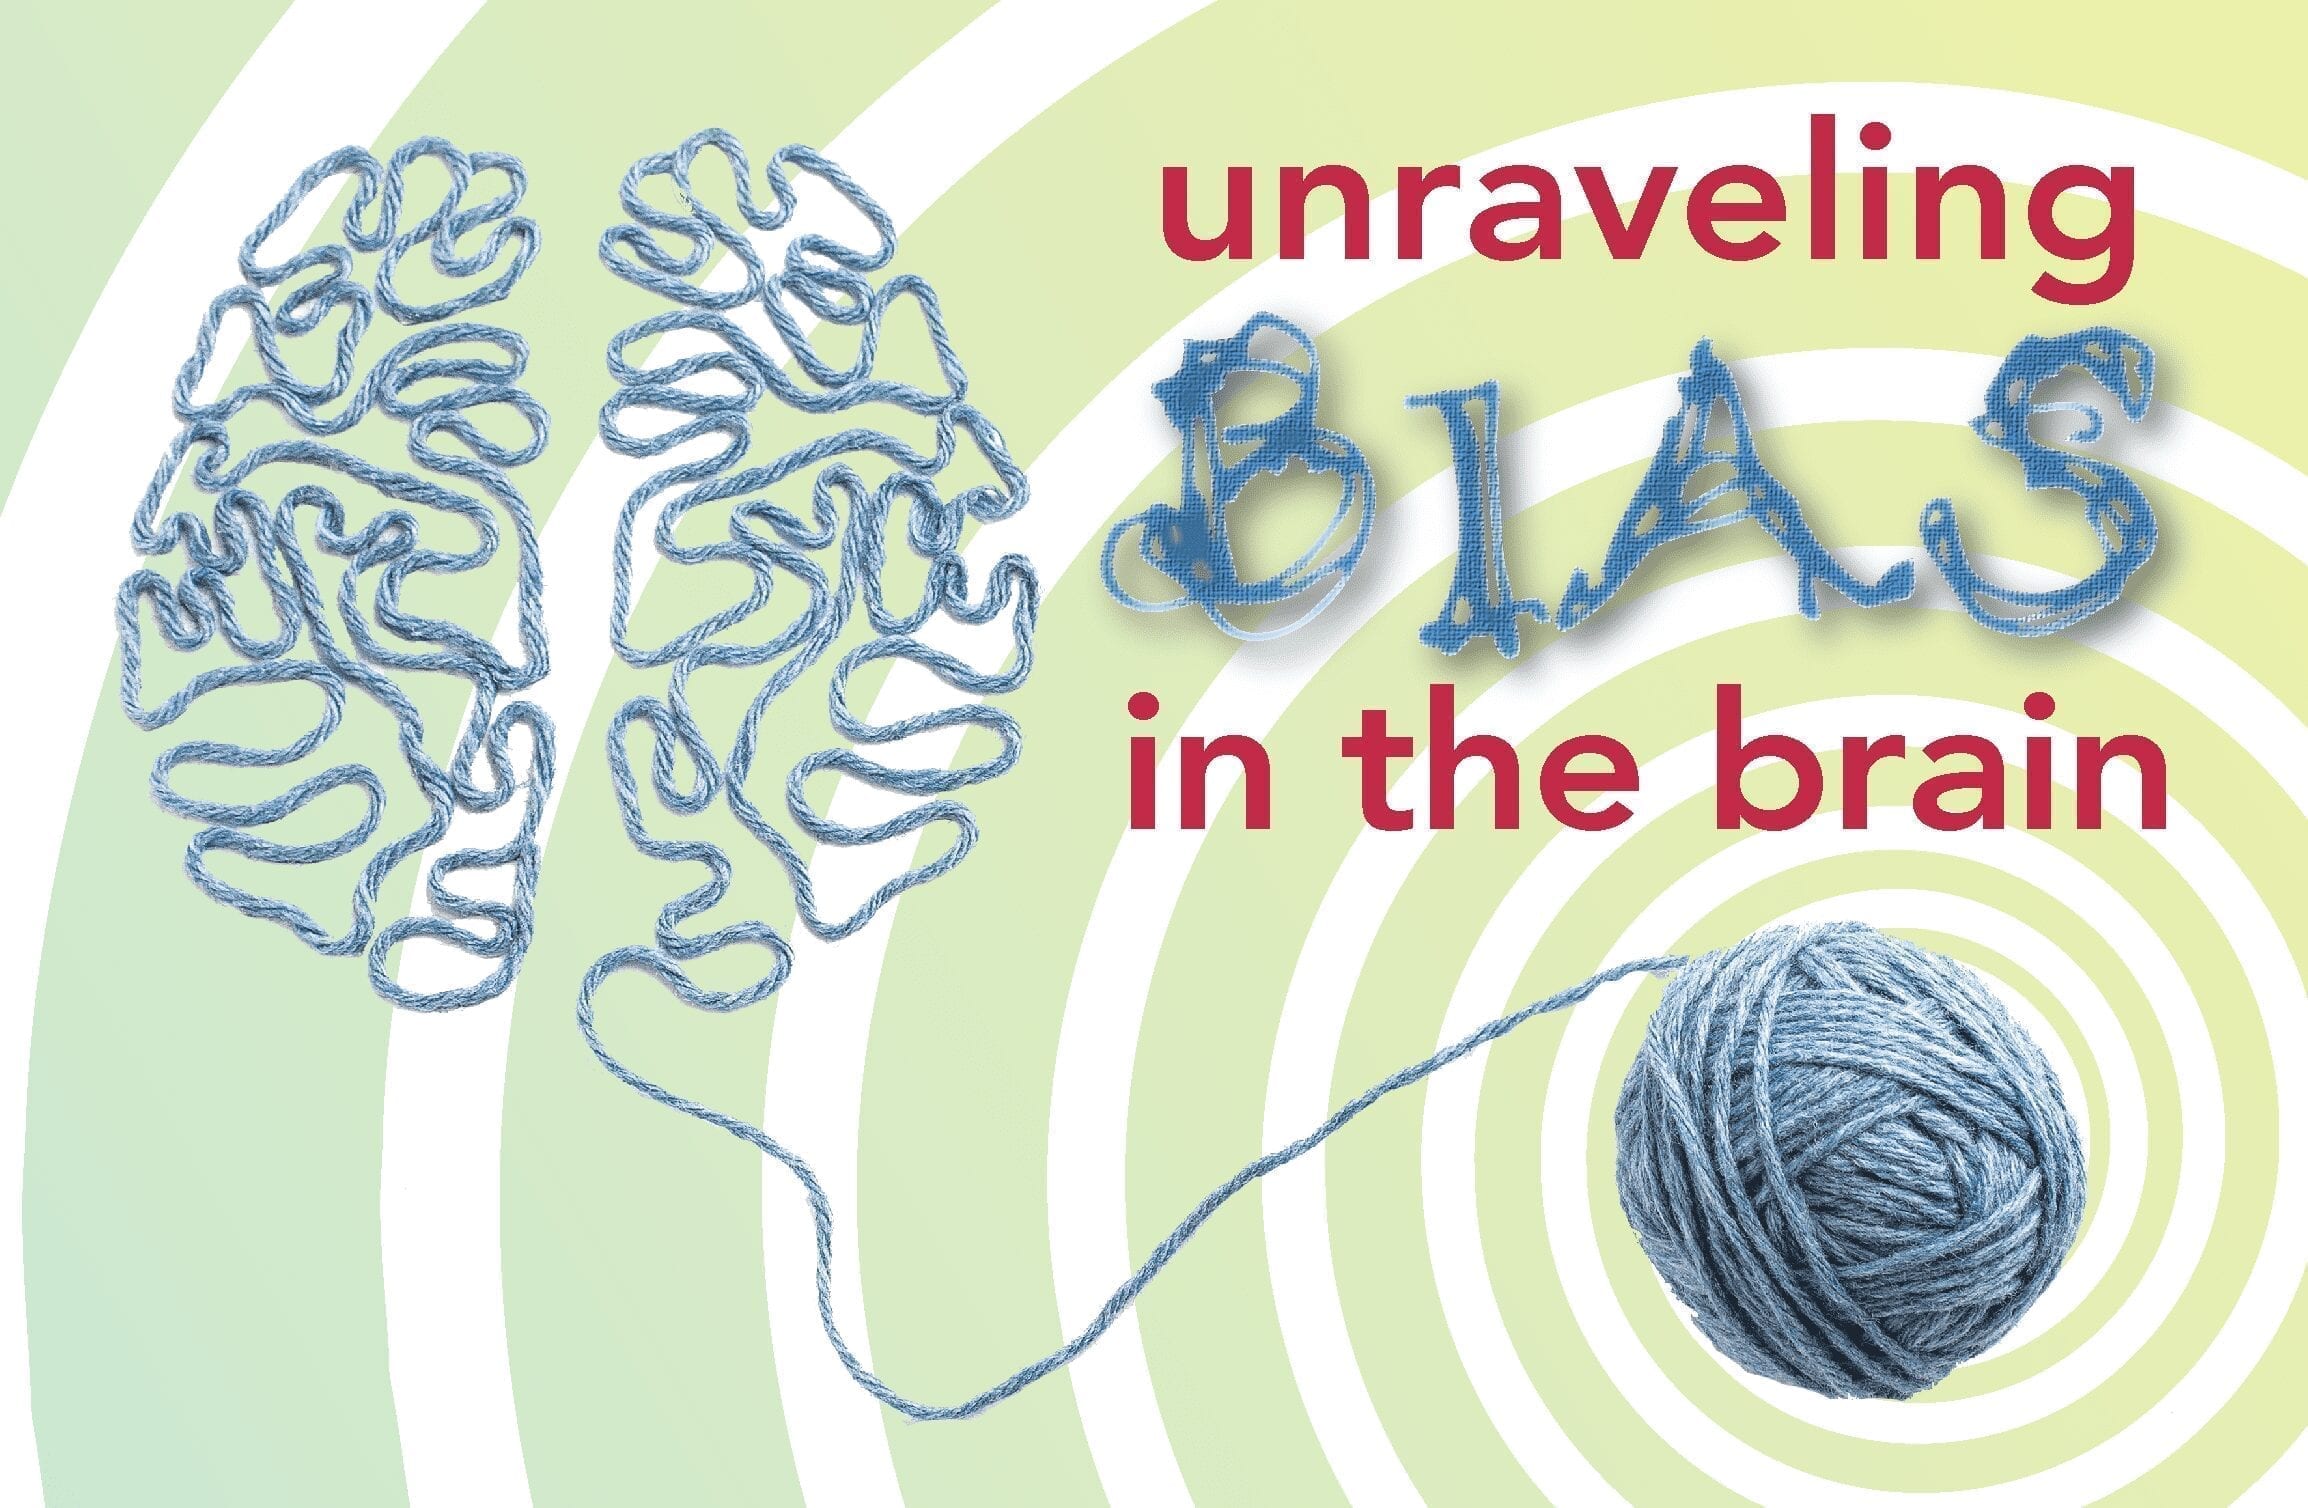 Learn more about the course: Unraveling Bias in the Brain